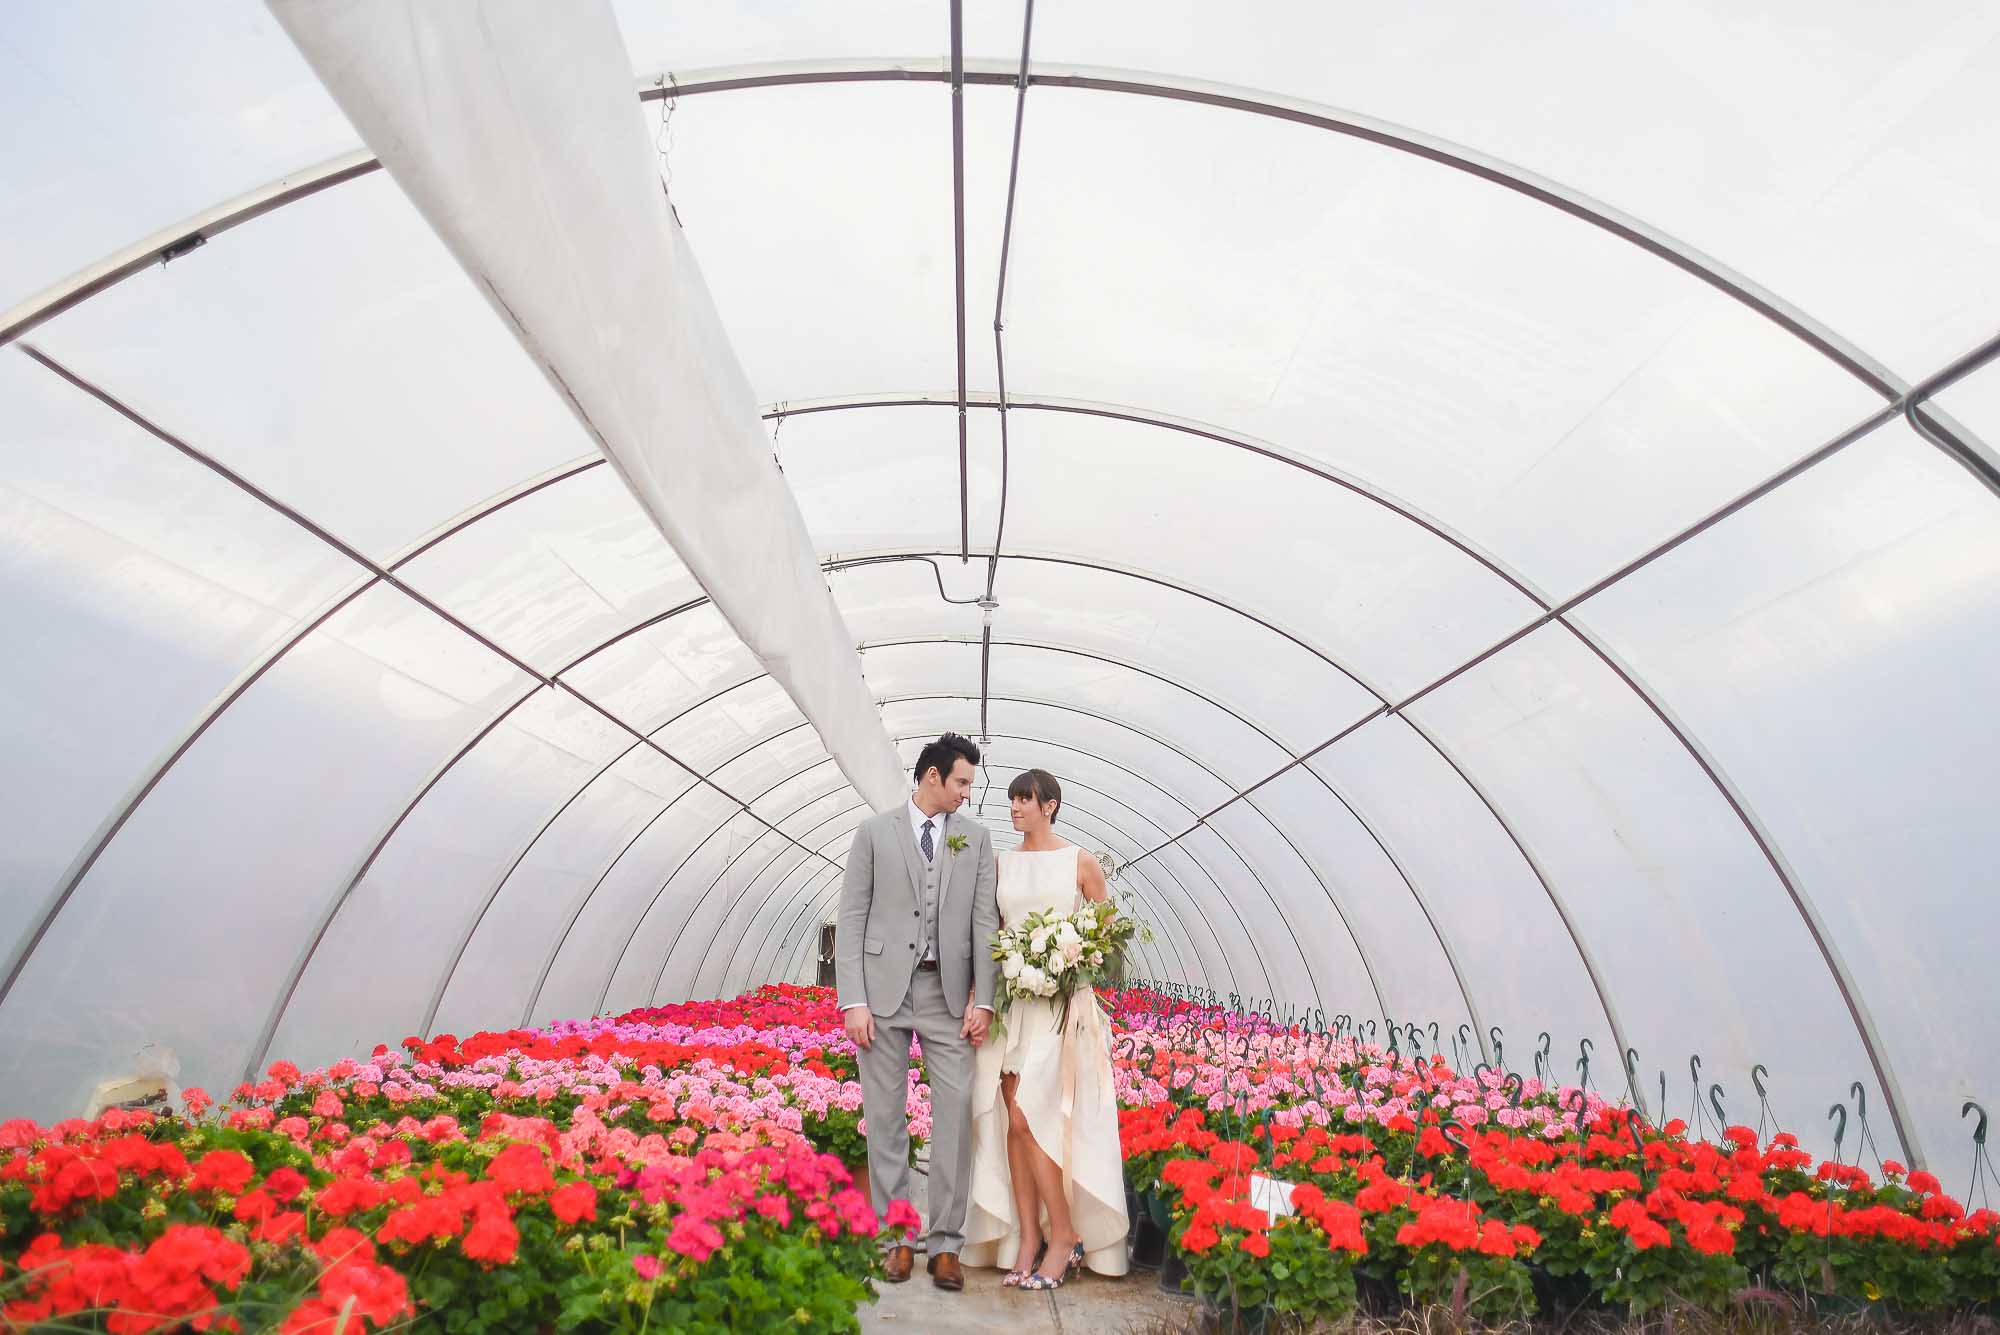 Bride and groom in greenhouse